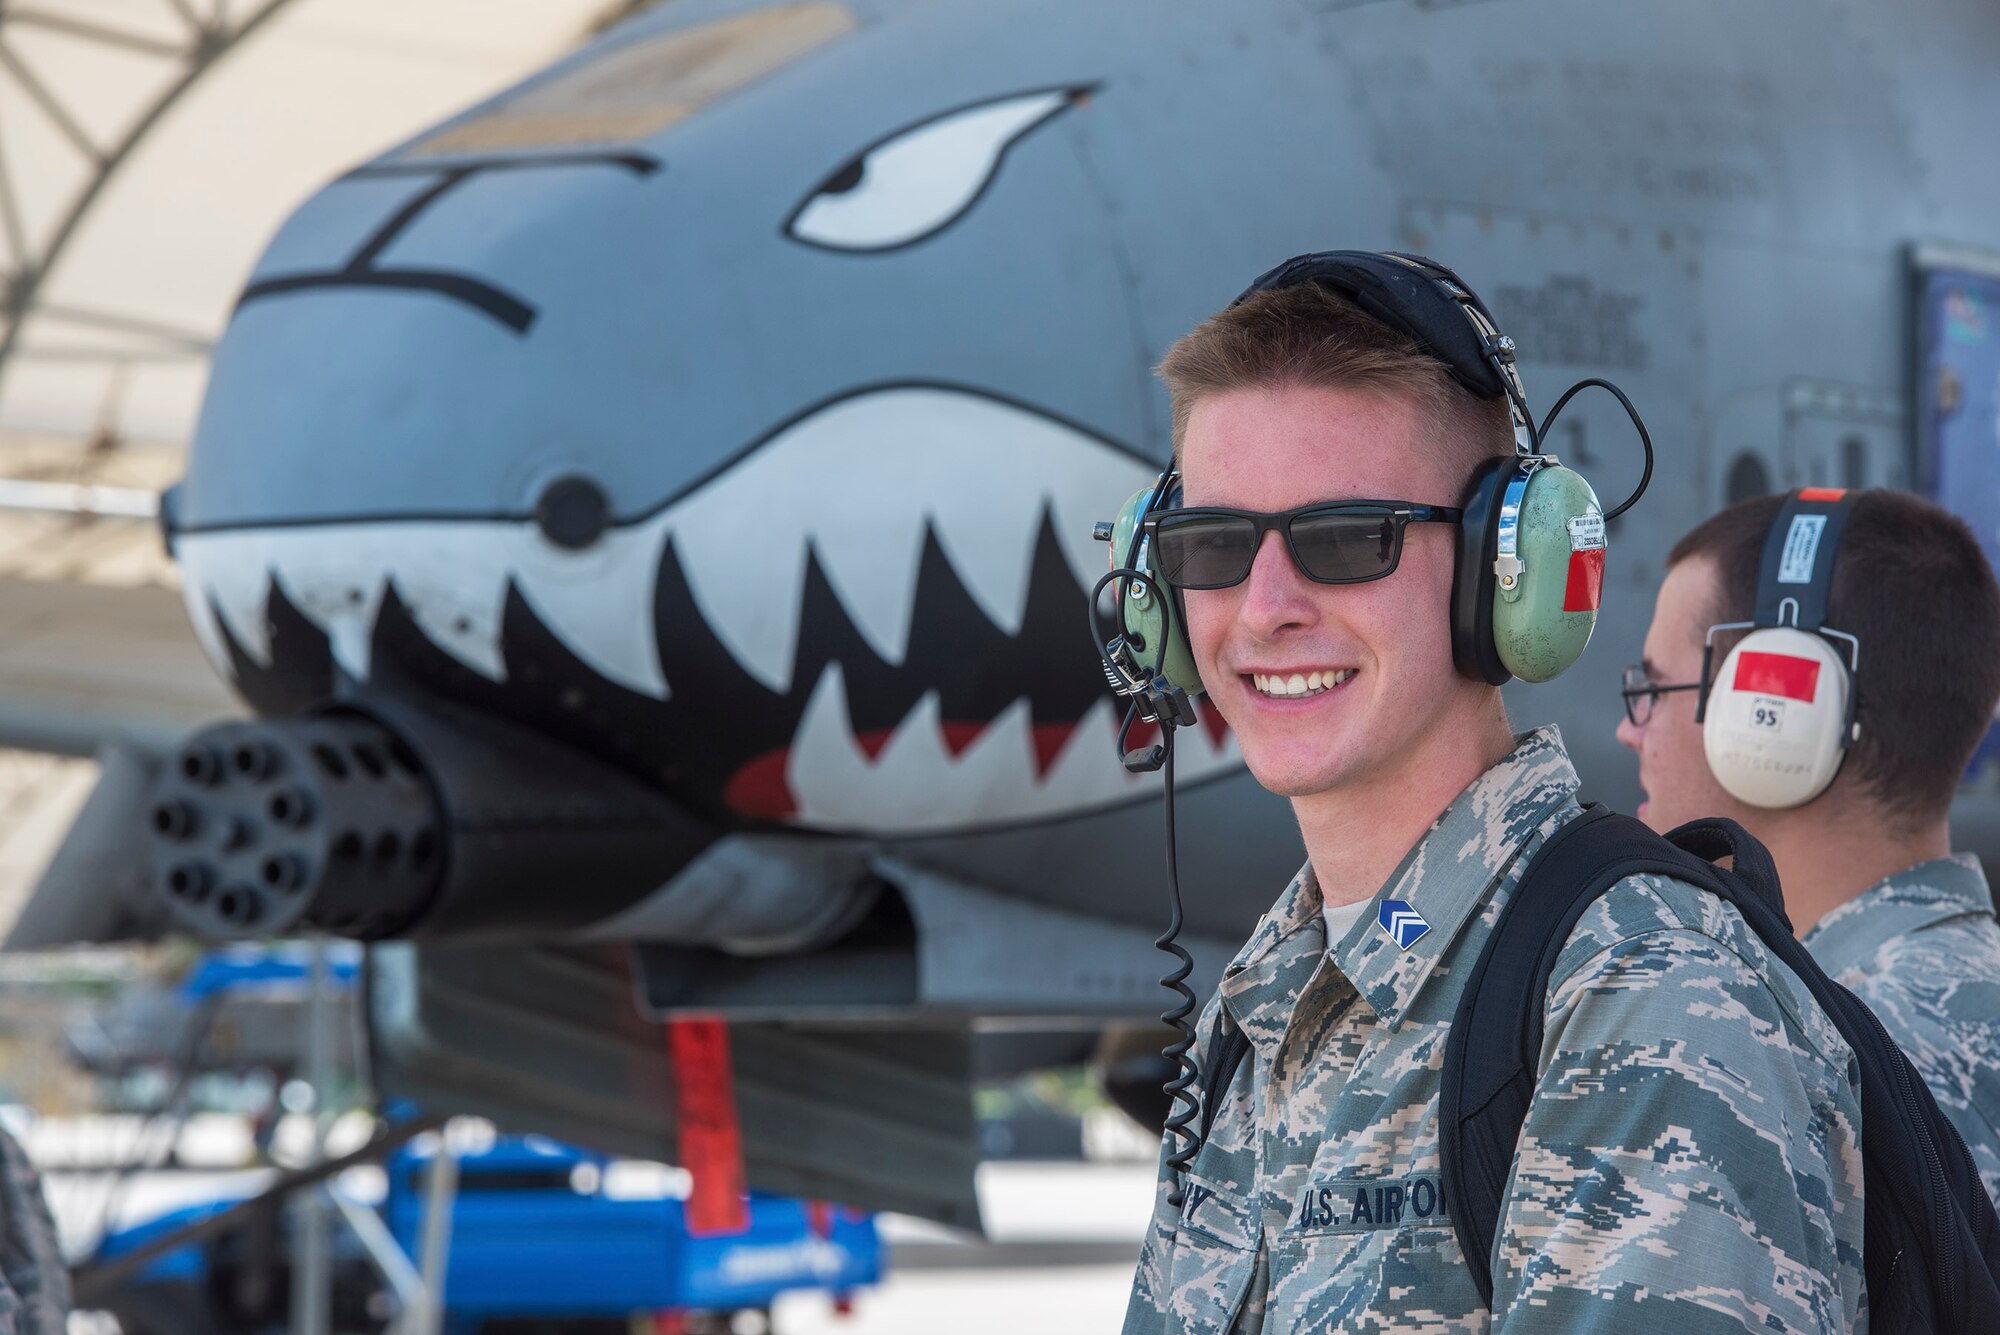 Cadet Tucker Penny, North Carolina State Detachment 595, smiles after watching an A-10C Thunderbolt II land during Operation Air Force 2017, June 16, 2017, at Moody Air Force Base, Ga. The annual event is designed to give cadets a hands-on training experience and a glance at various mission assets at bases across the world. The program allows cadets to confirm or reassess their pursued career fields while learning different support functions to become better leaders of Airmen in the future. (U.S. Air Force photo by Senior Airman Greg Nash)